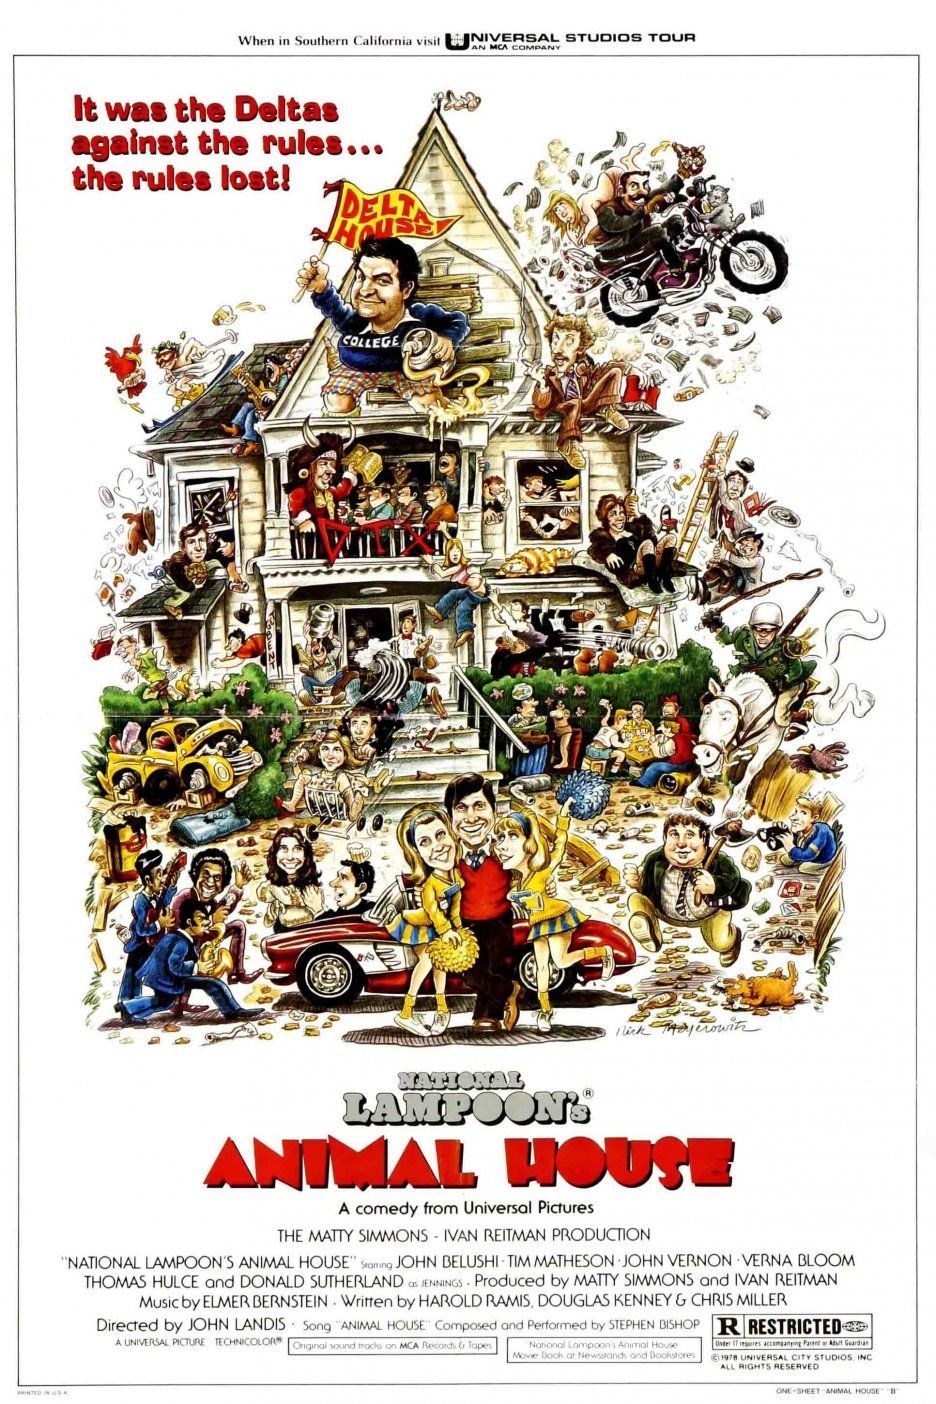 The official poster for Animal House